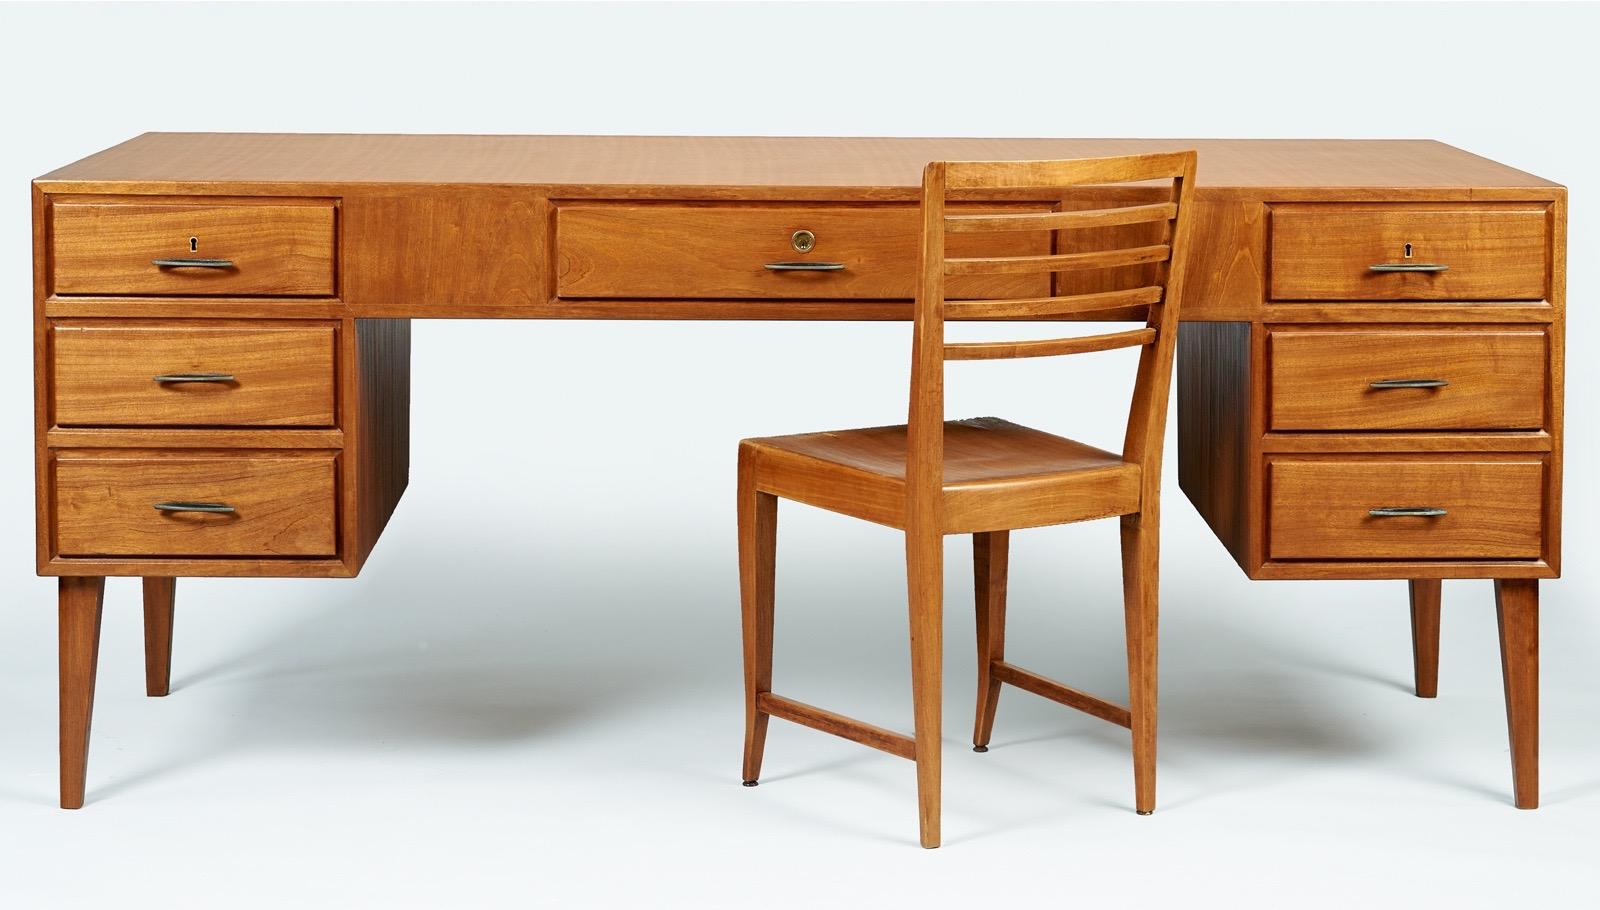 Gio Ponti (1891-1979)

An extremely rare and important desk set by Gio Ponti in reeded mahogany, comprised of an impeccably crafted floating desk, elegant desk chair, and matching geometric bookcase or end table. The architectural floating desk